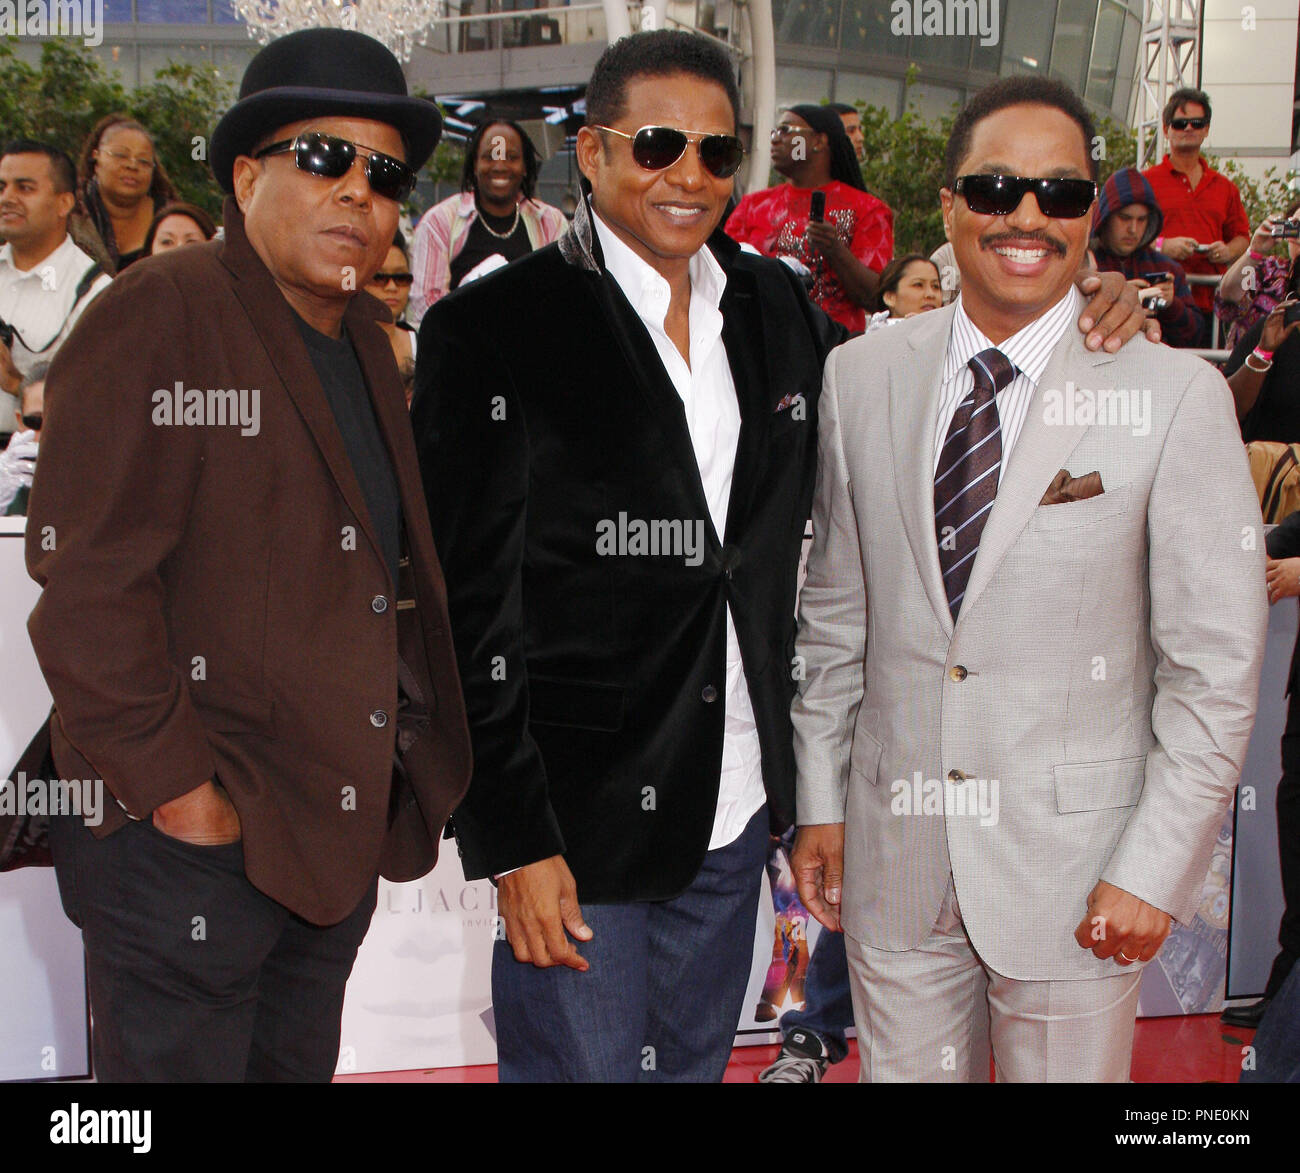 Tito Jackson, Marlon Jackson & Jackie Jackson arriving at the Los Angeles Premiere of Michael Jackson's 'This Is It' held at the NOKIA Theatre in Los Angeles, CA. The event took place on Tuesday, October 27, 2009. Photo by: Pedro Ulayan Pacific Rim Photo Press.  / PictureLux File Reference # TitoJackson MarlonJackson JackieJackson 102709 2PRPP   For Editorial Use Only -  All Rights Reserved Stock Photo